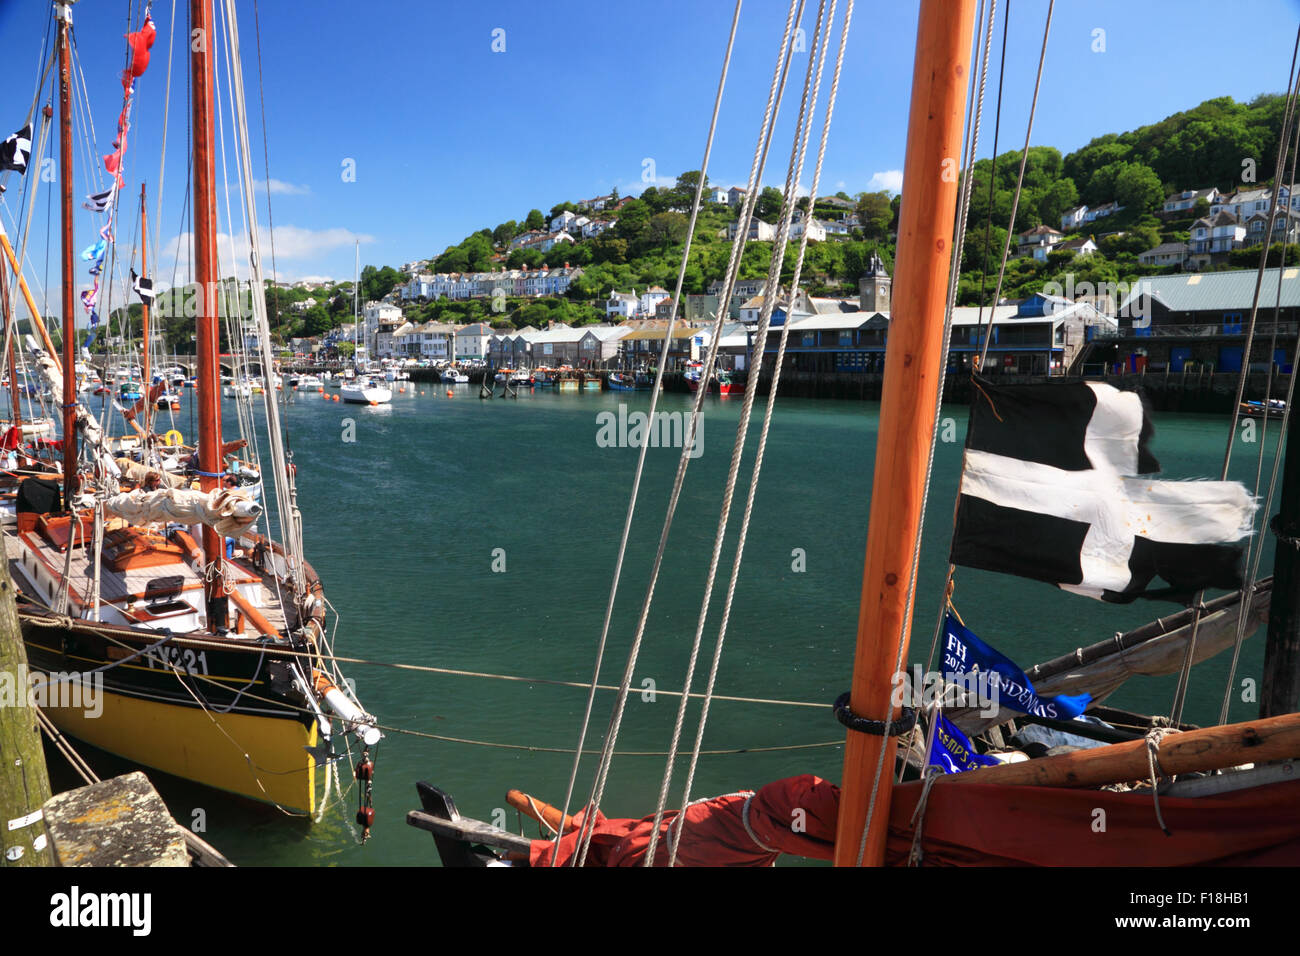 A tattered Cornish flag flies from a lugger moored at Looe, Cornwall. Stock Photo